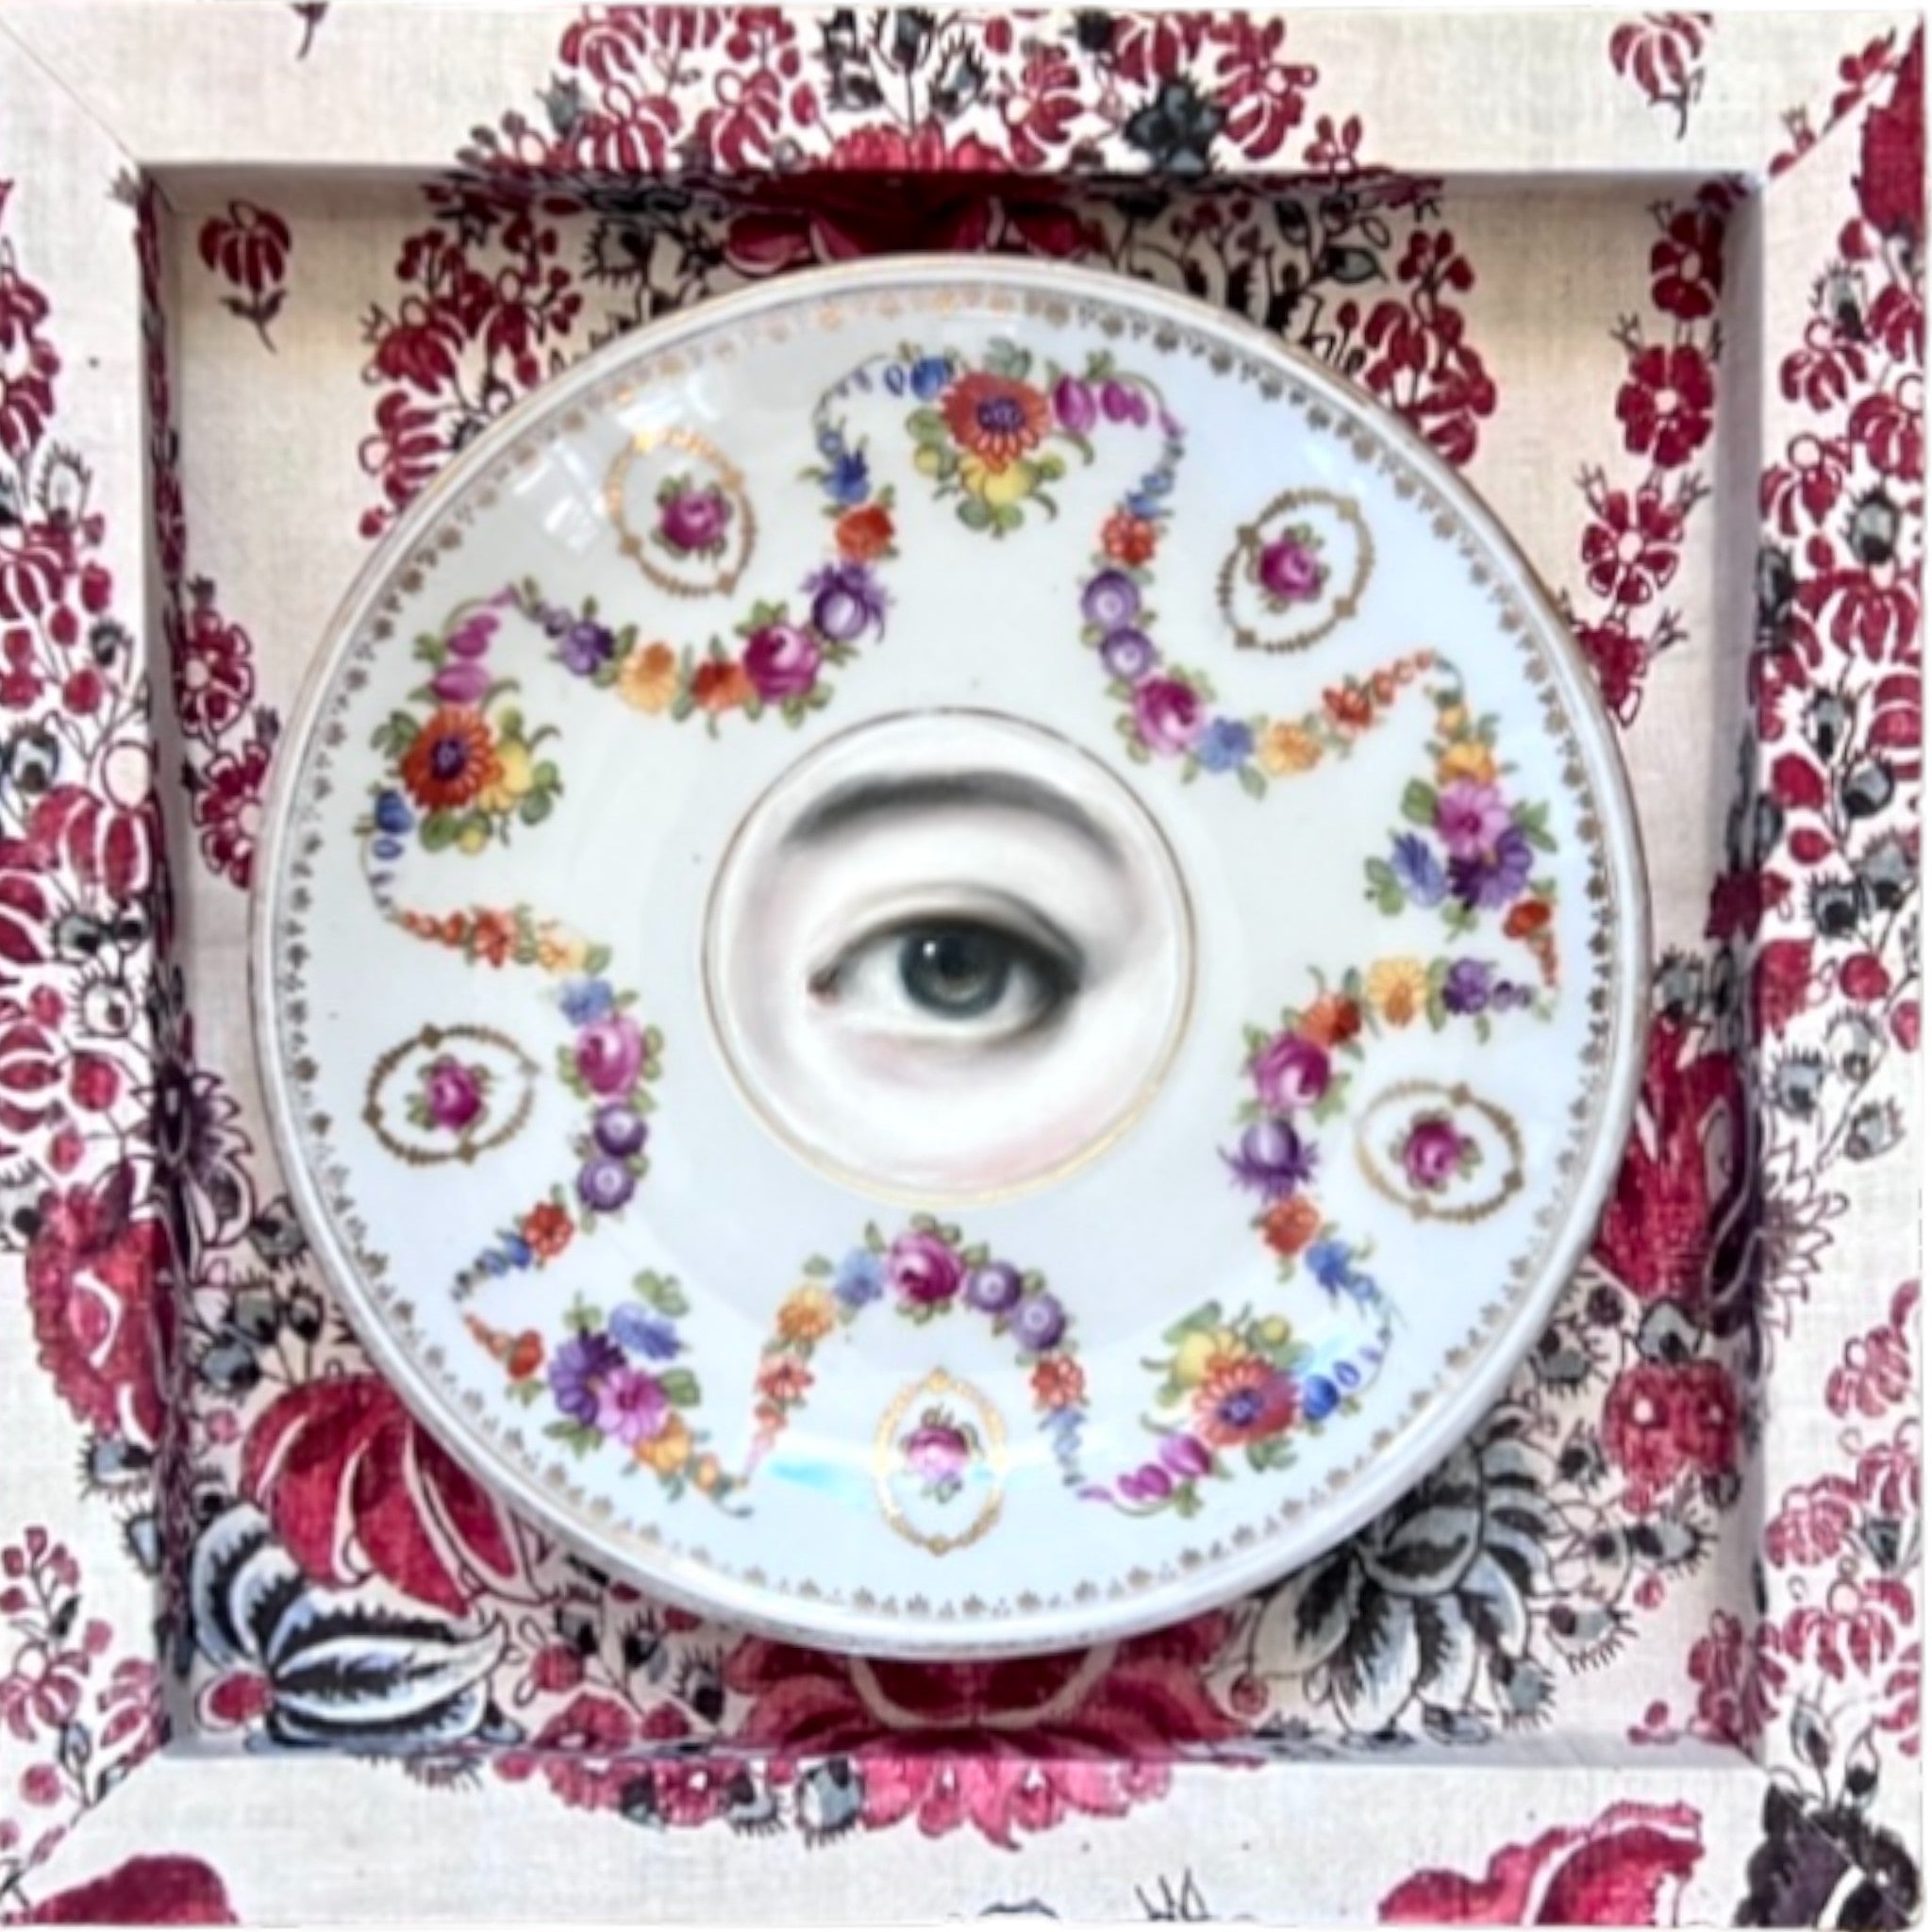 No. 1917 Lover's Eye Painting on a Schumann Flower Garland Plate